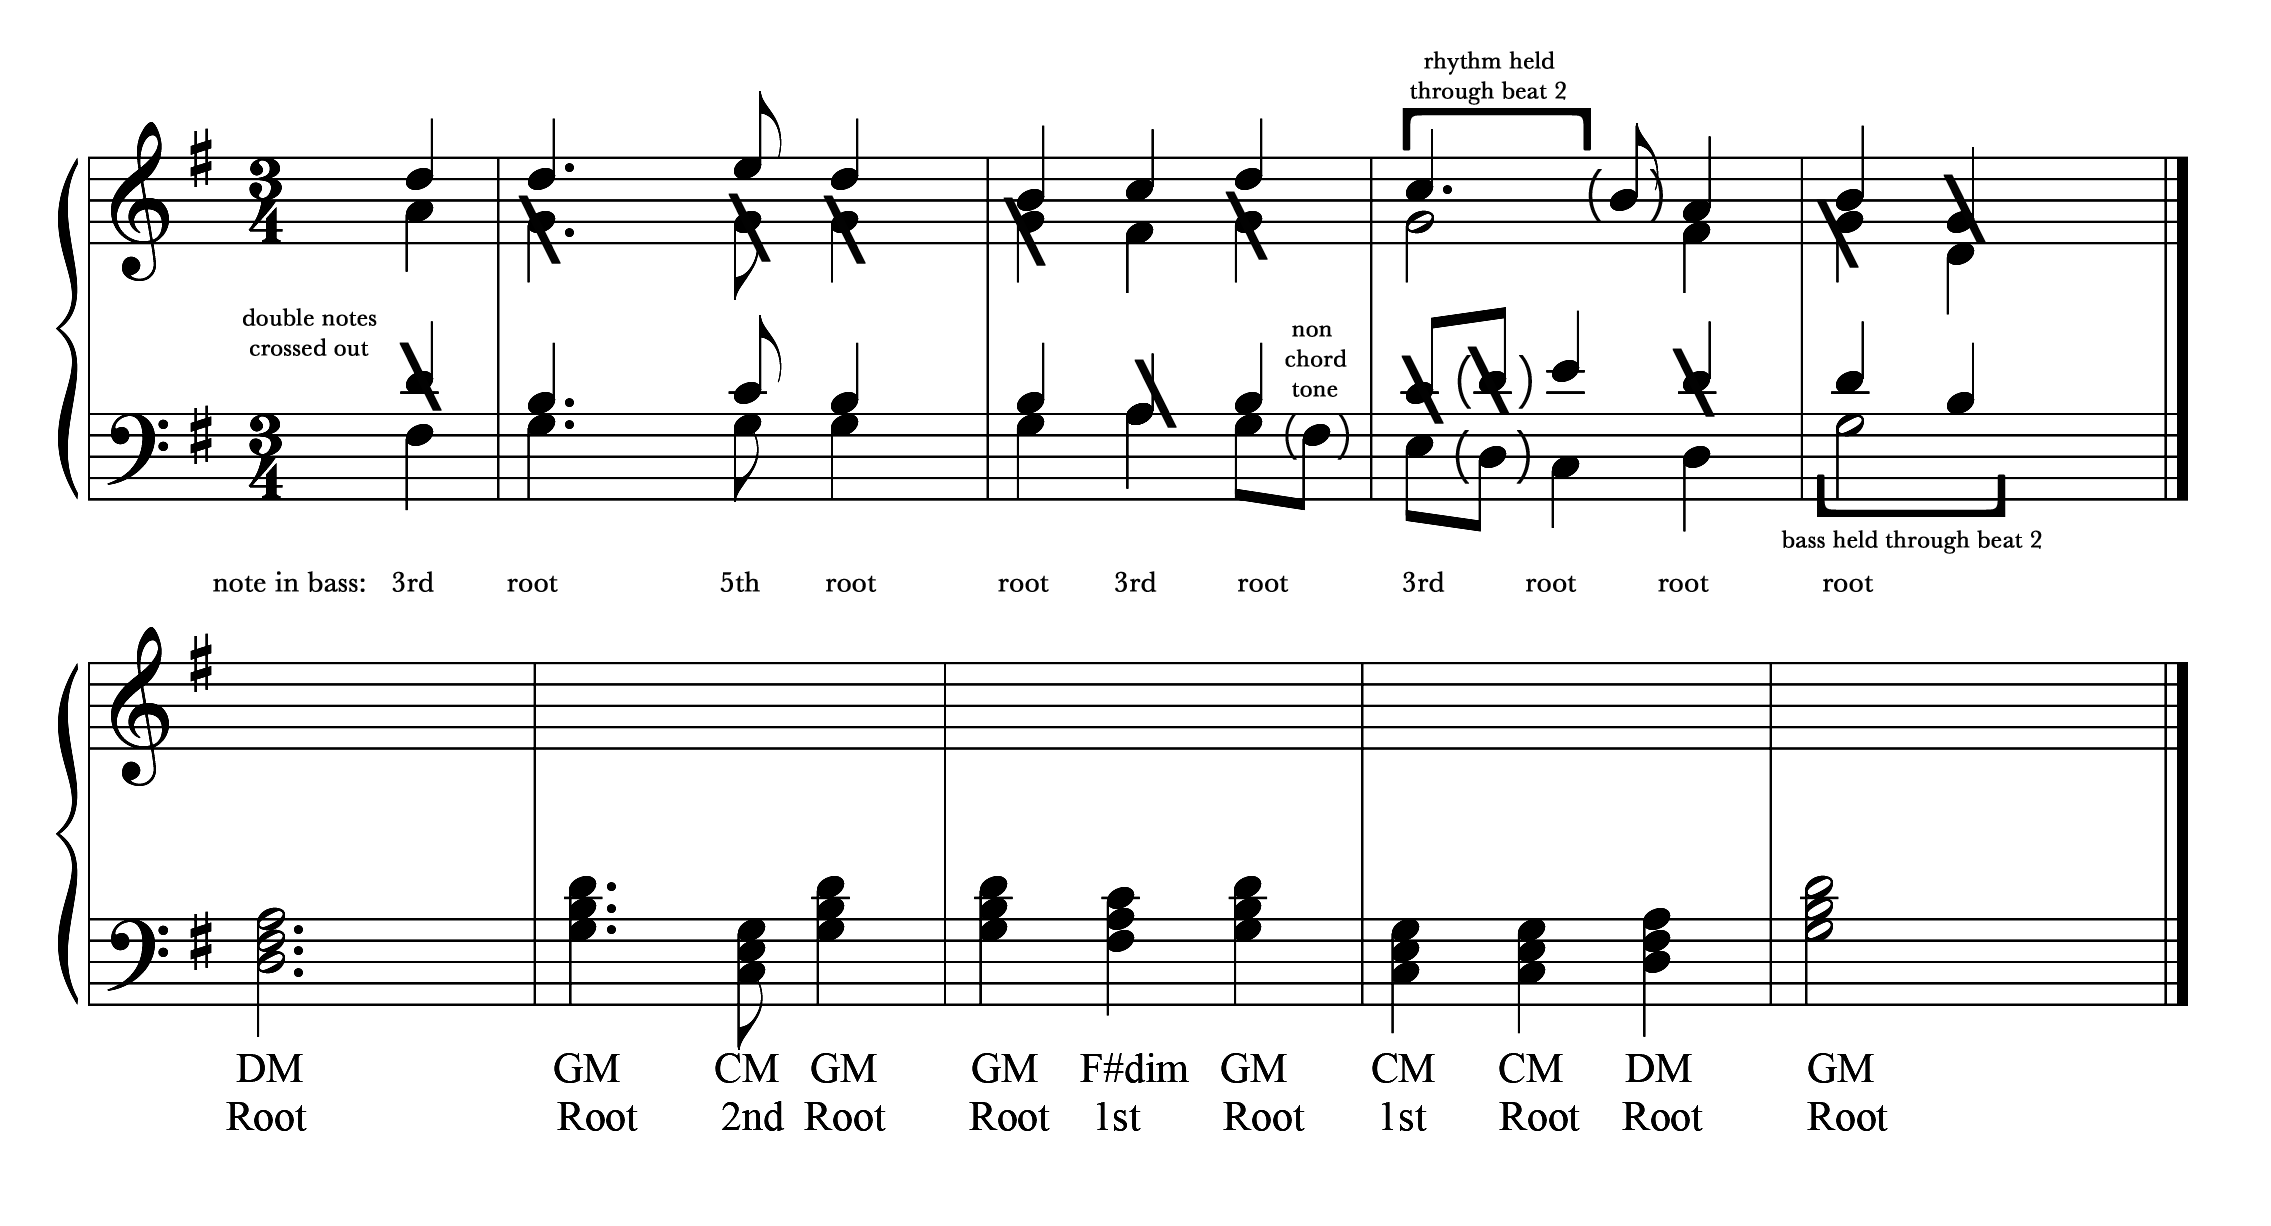 Score analysis of Hymn arrangement of "A Prayer for Thanksgiving," measures 1 to 4 with all triads drawn and labeled on a staff.